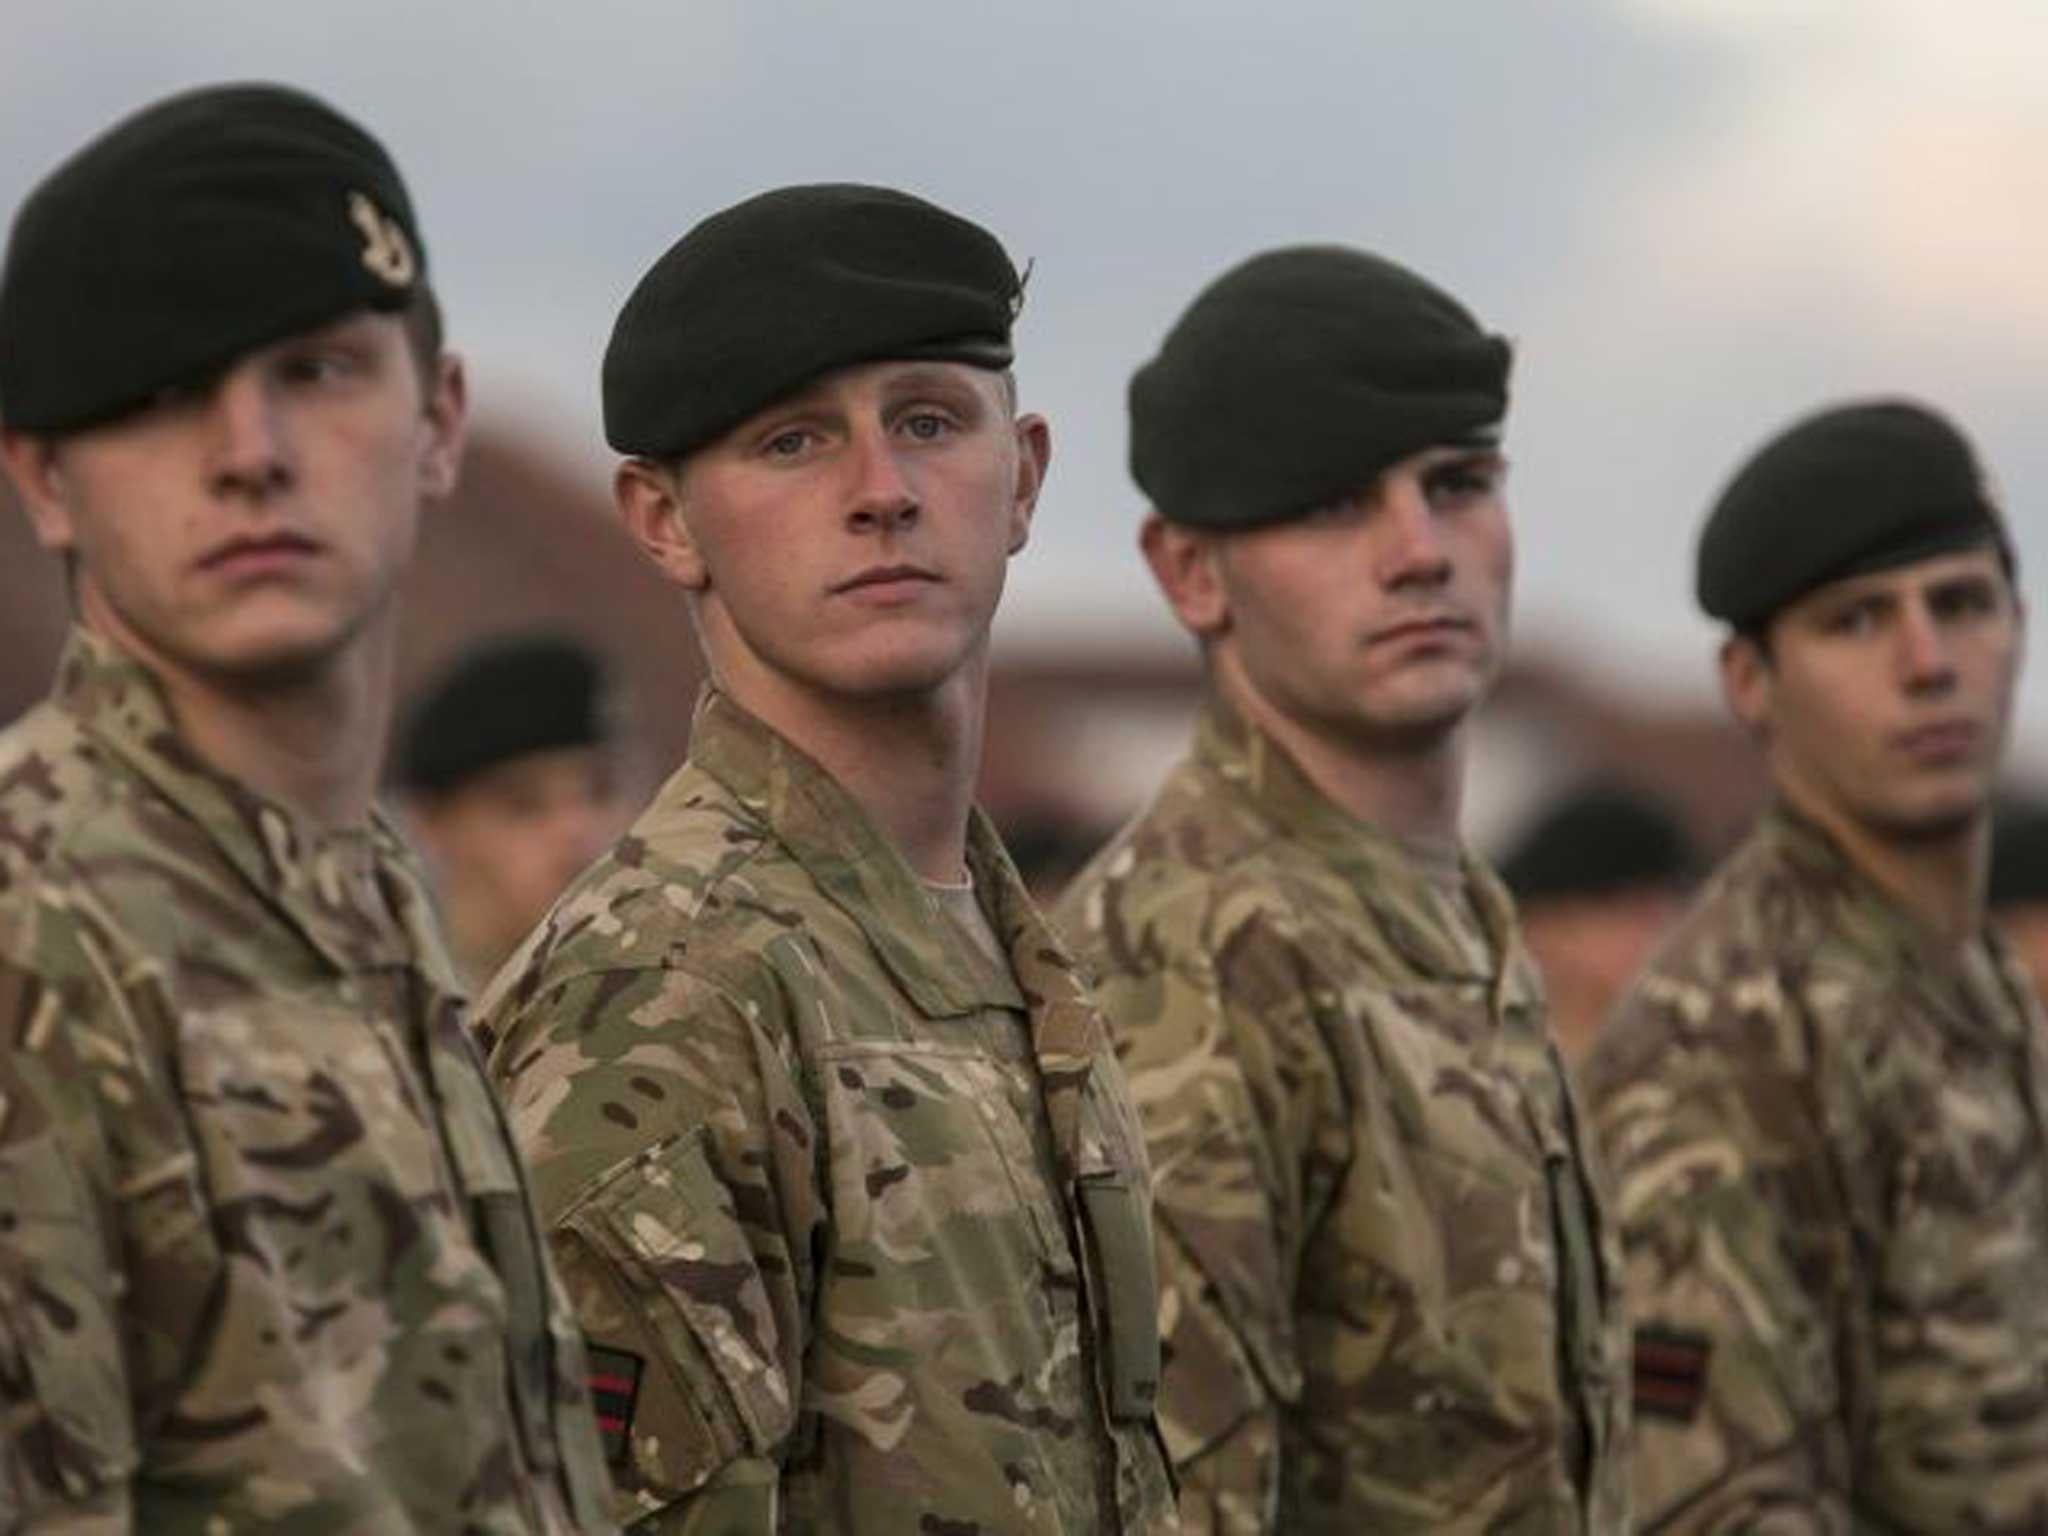 The Ministry of Defence has defended its recruitment policies